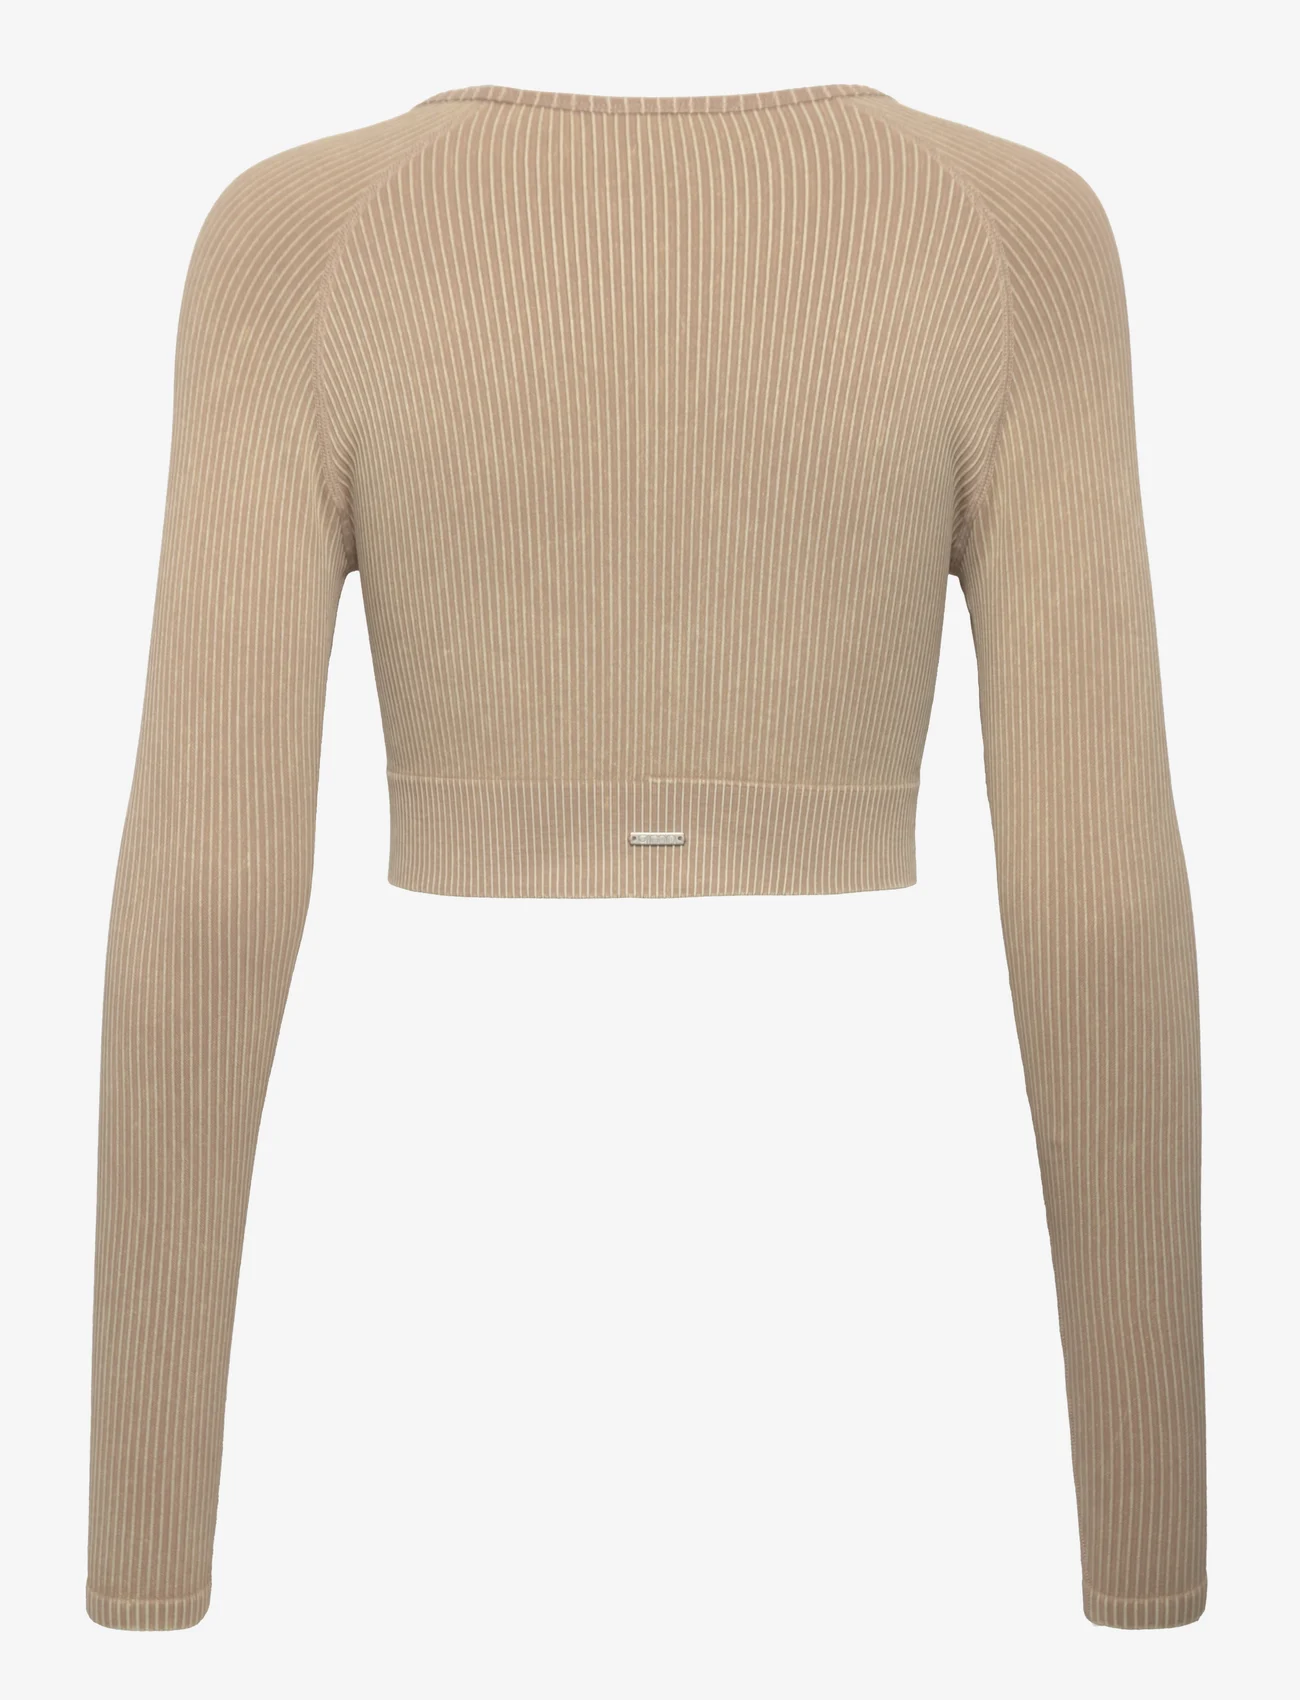 AIM'N - Sand Washed Ribbed Seamless Crop Long Sleeve - pitkähihaiset topit - sand washed - 1